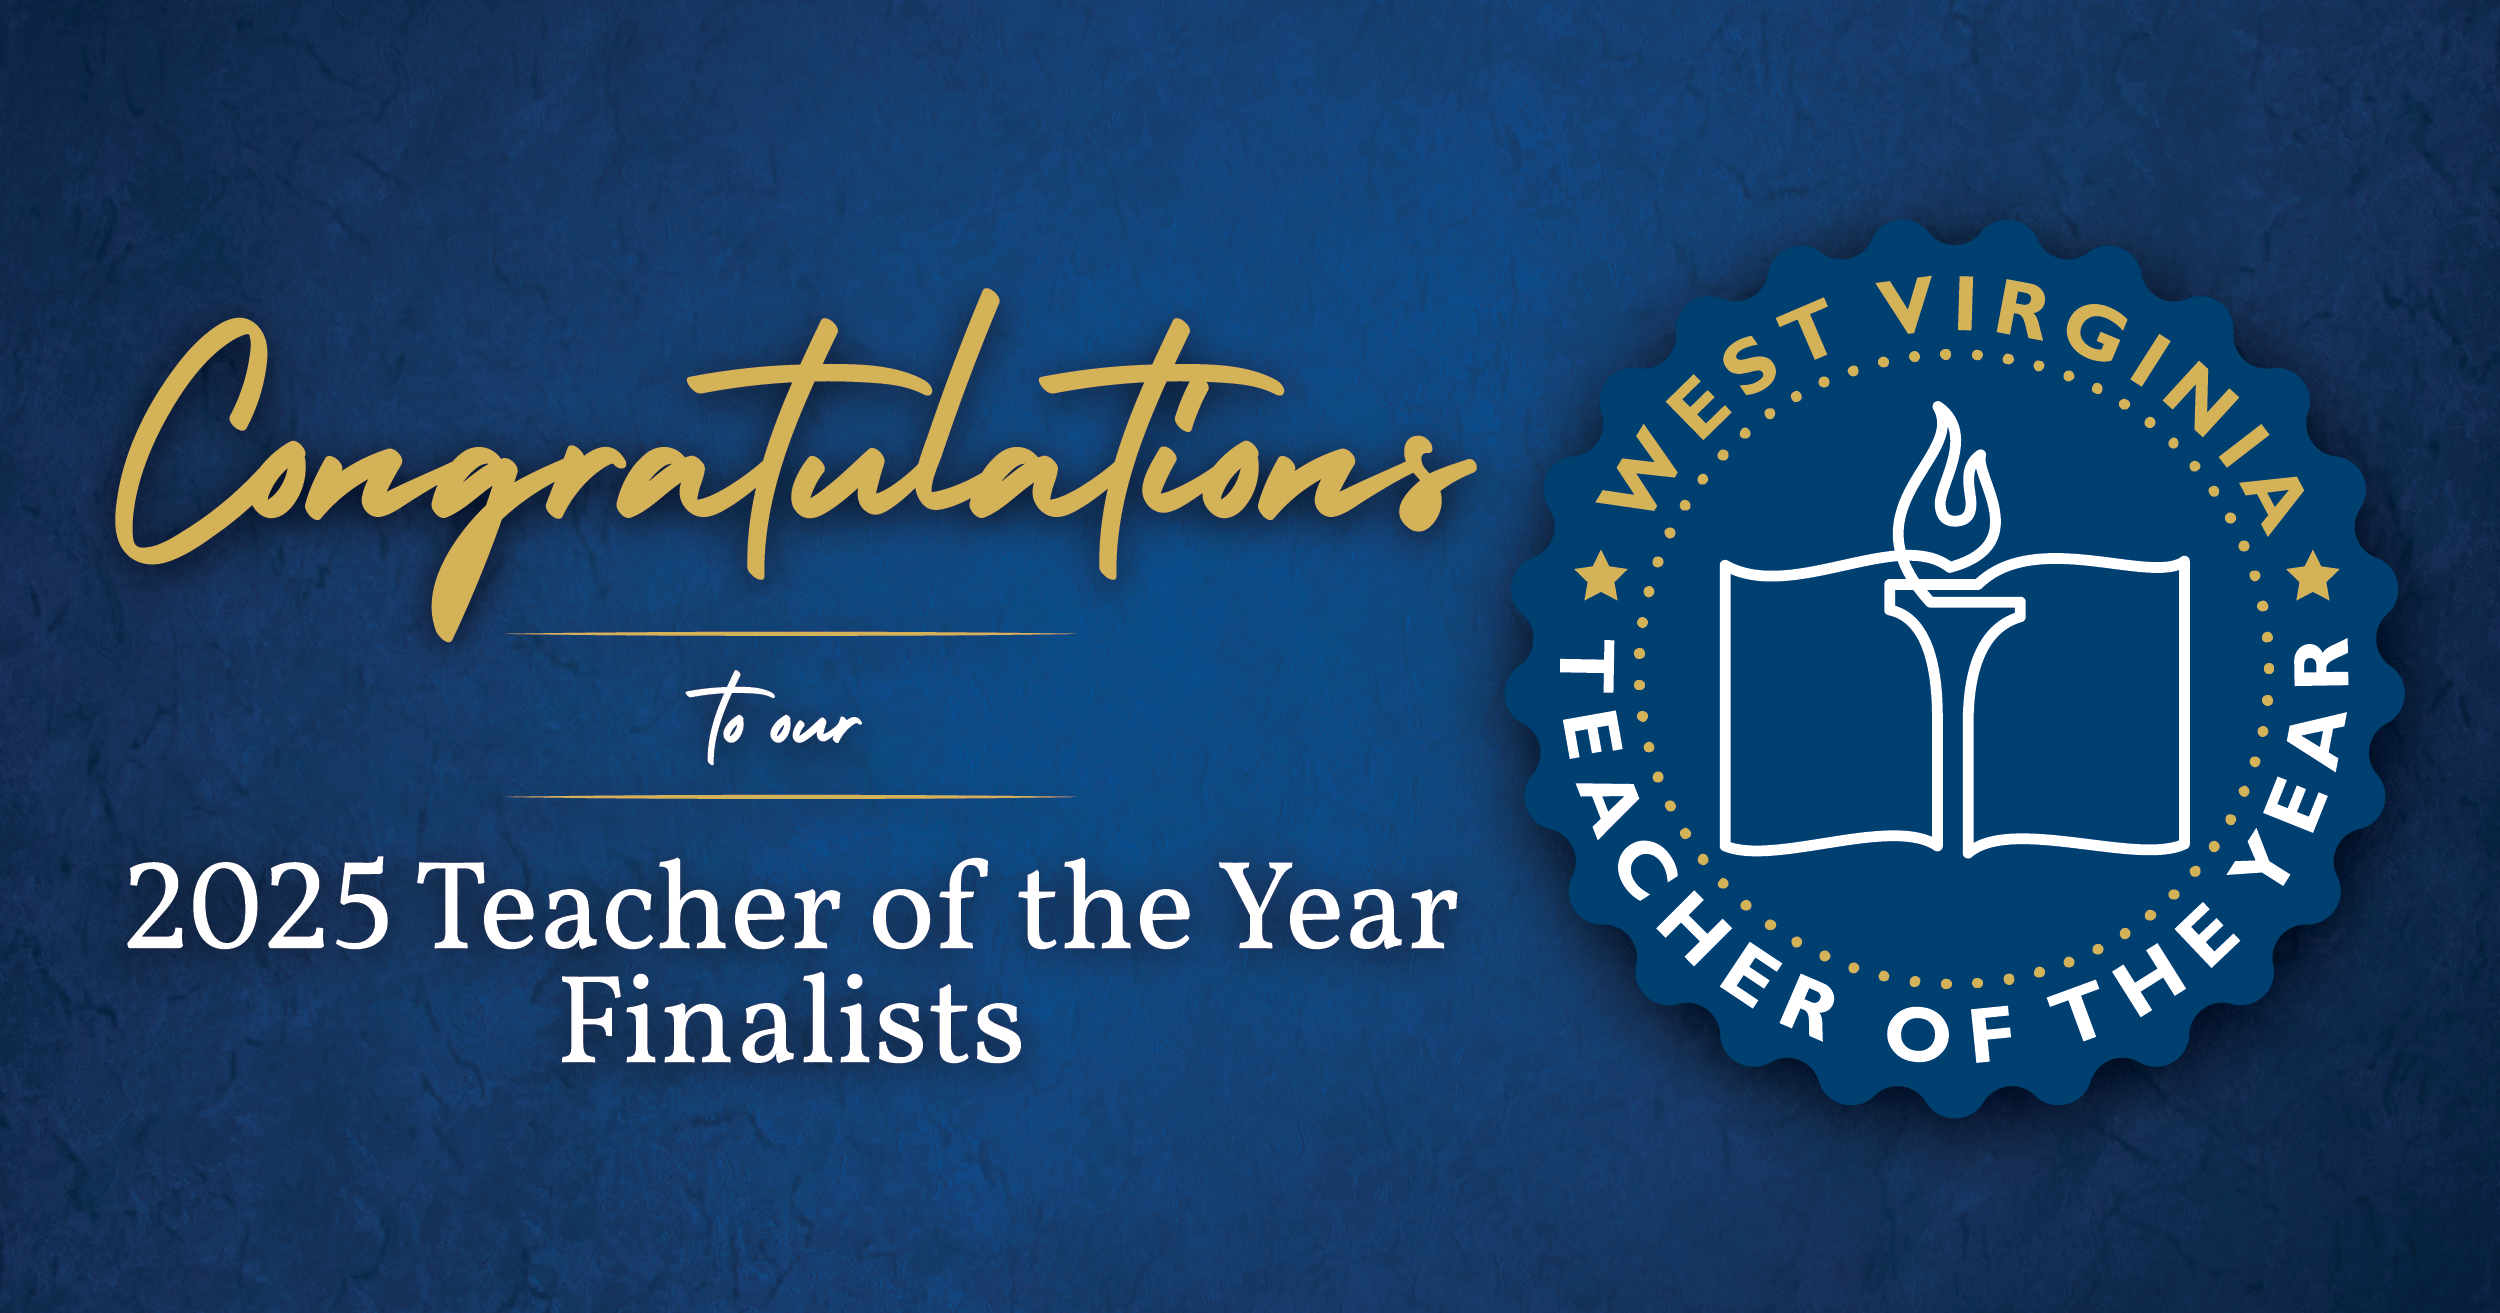 Graphic with the words "Congratulations to our 2025 Teacher of the Year Finalists" on it.